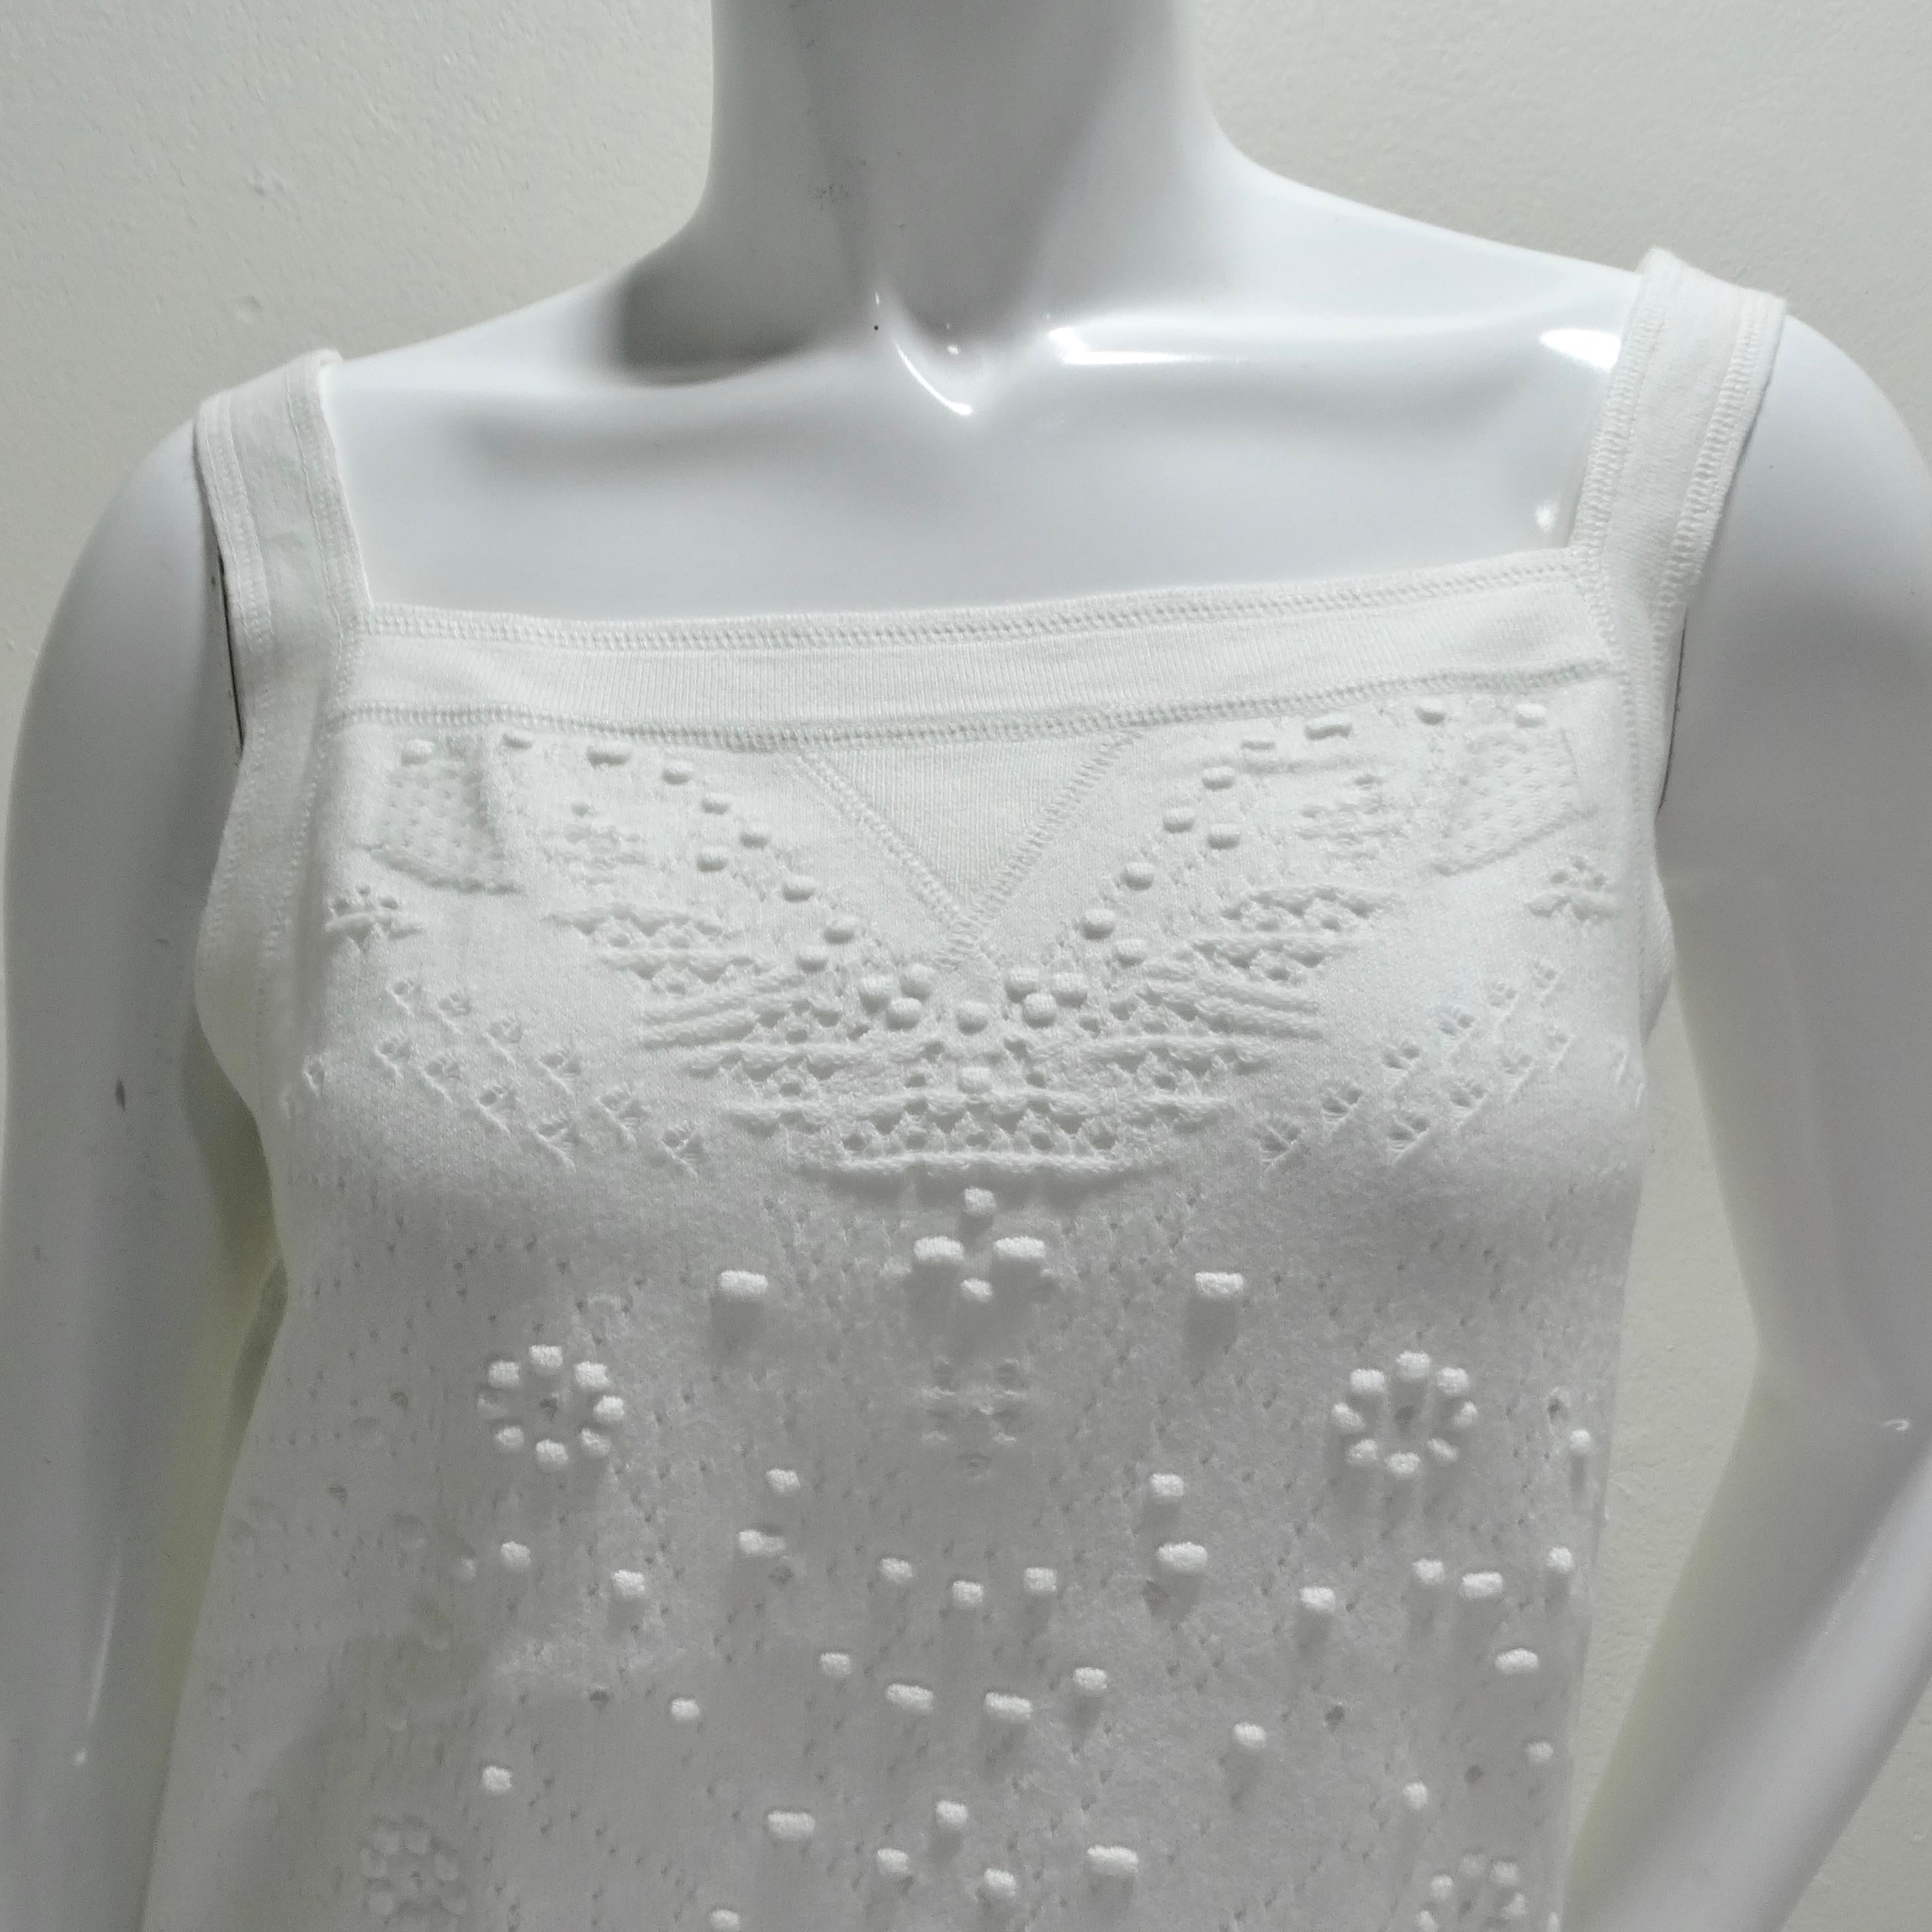 The Chanel White Perforated Knit Tank Top is a classic yet distinctive piece that showcases Chanel's commitment to timeless elegance and artisanal craftsmanship. This tank top, with its straight neckline, is composed of a white cotton knit featuring